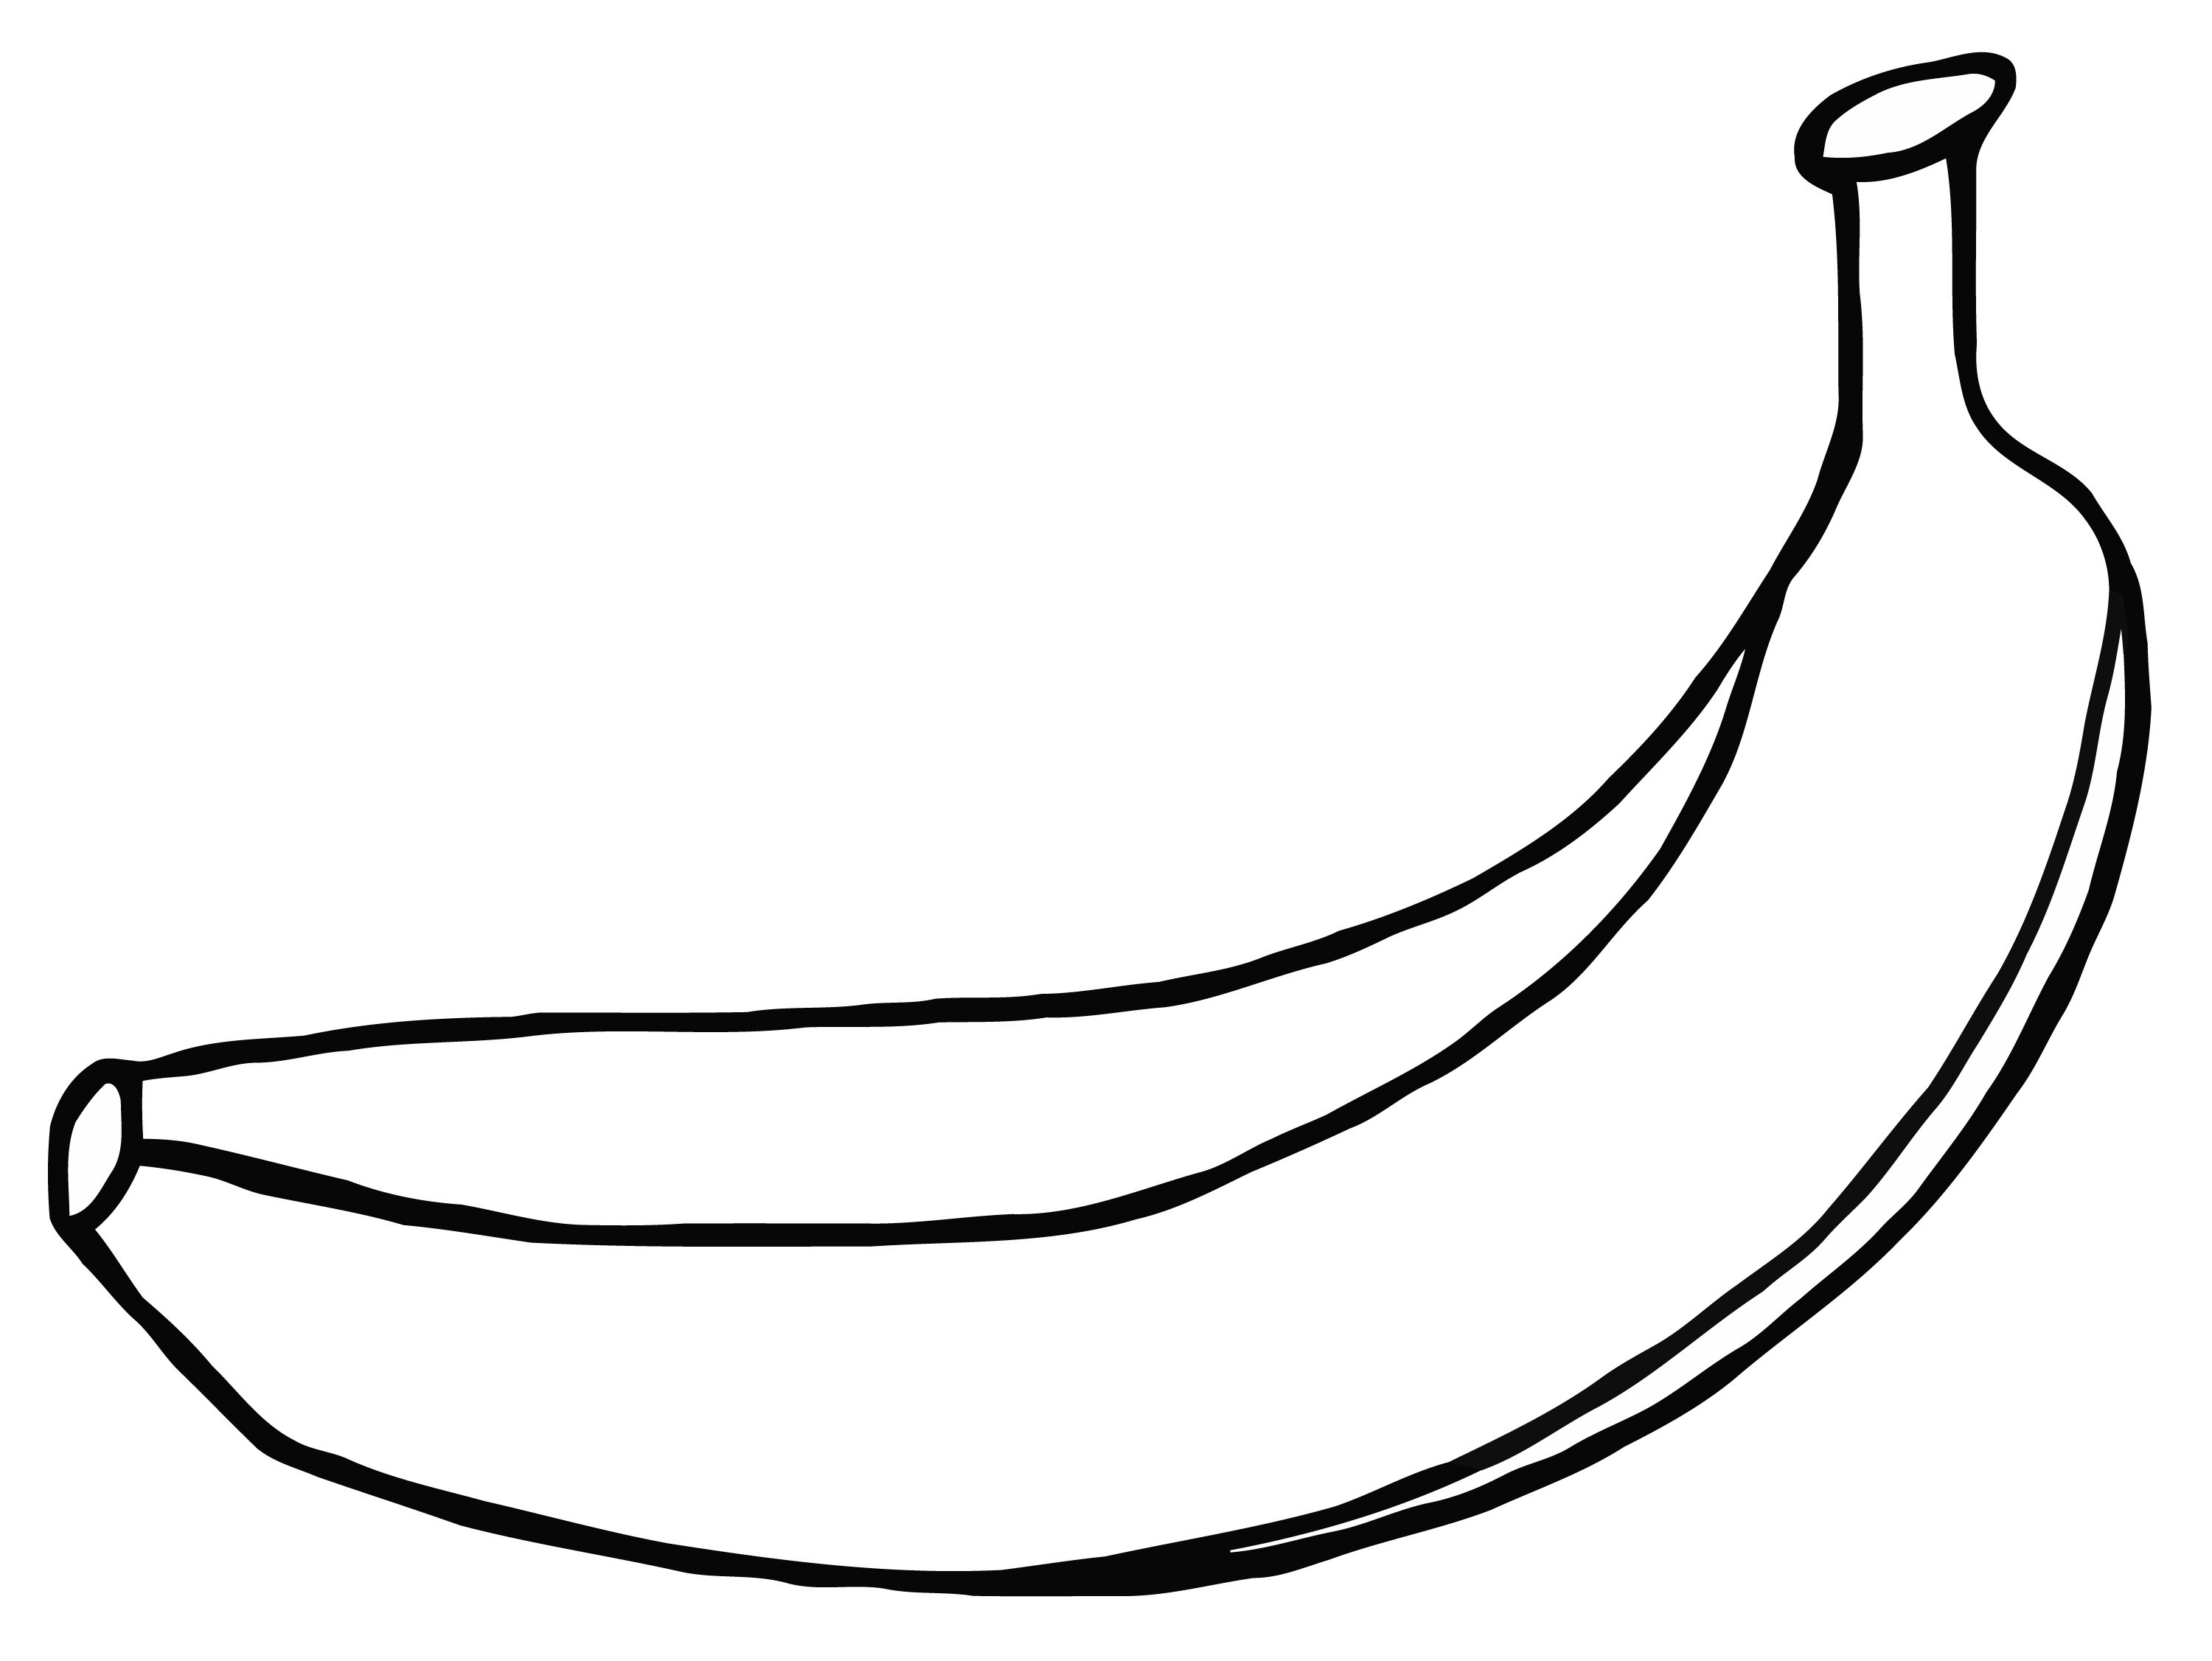 Free Banana Outline Cliparts, Download Free Clip Art, Free.